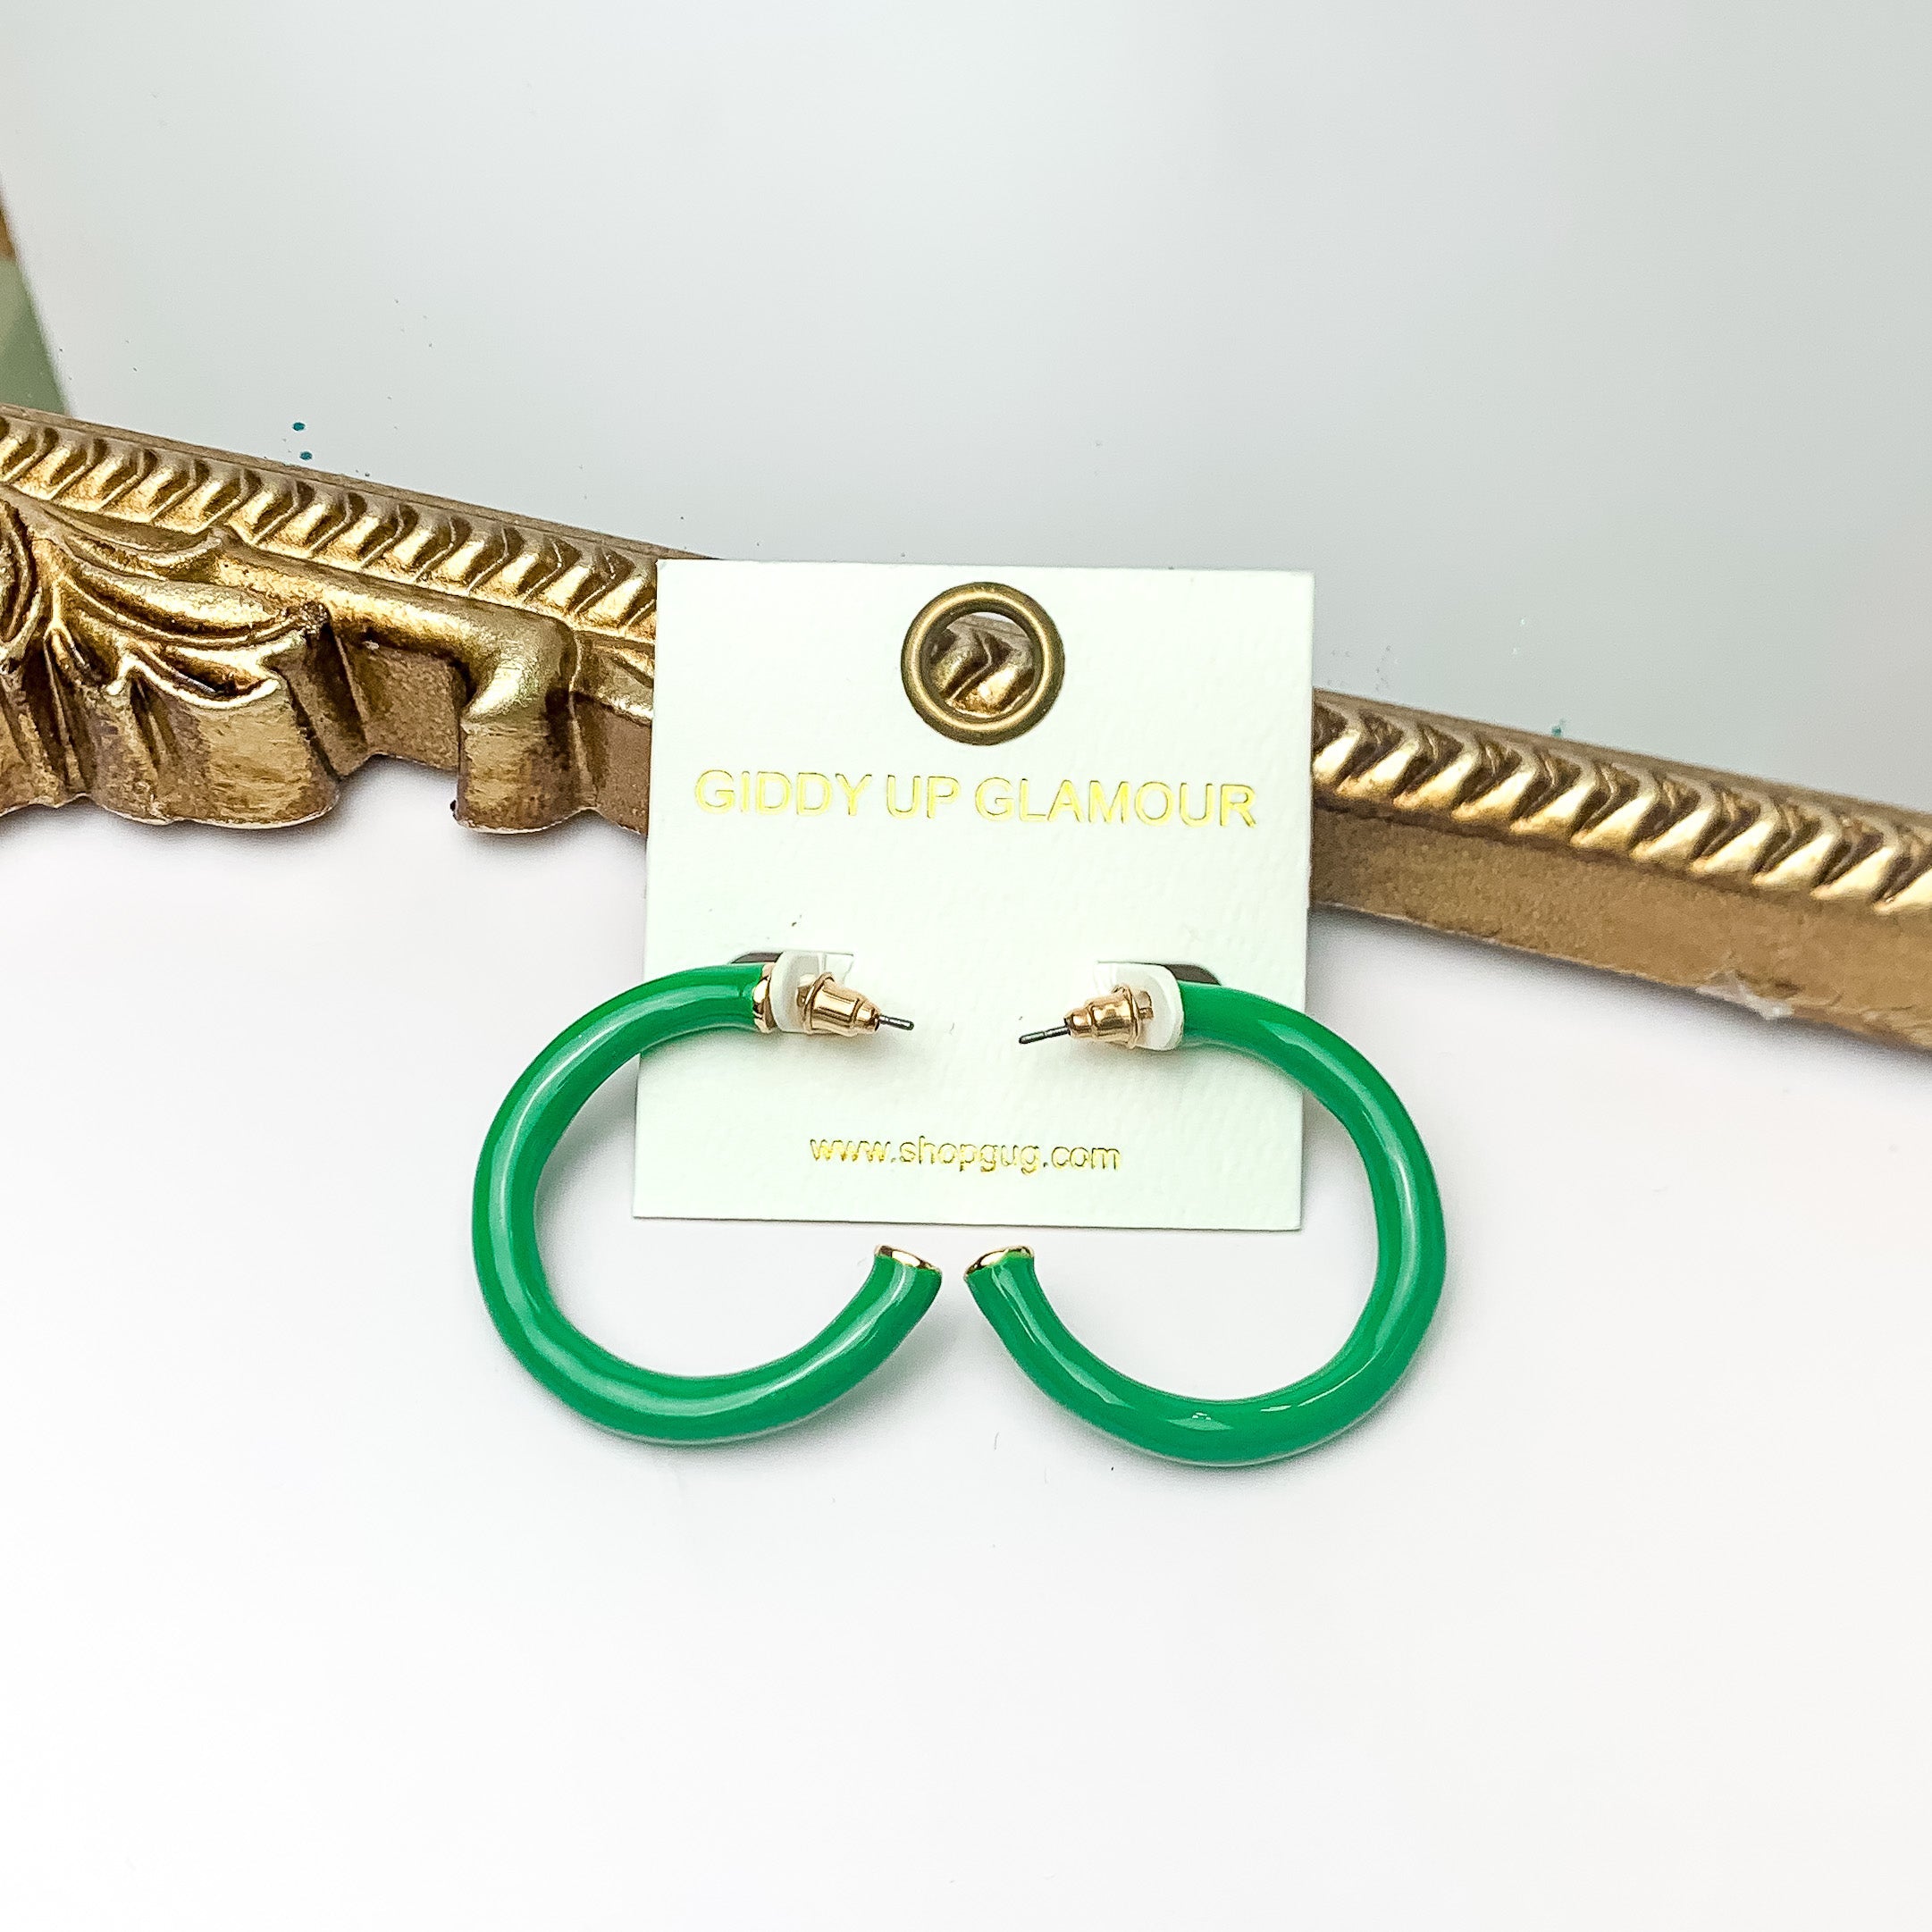 Plan For Cabo Small Hoop Earrings in Green. Pictured on a white background with a gold frame behind the earrings.